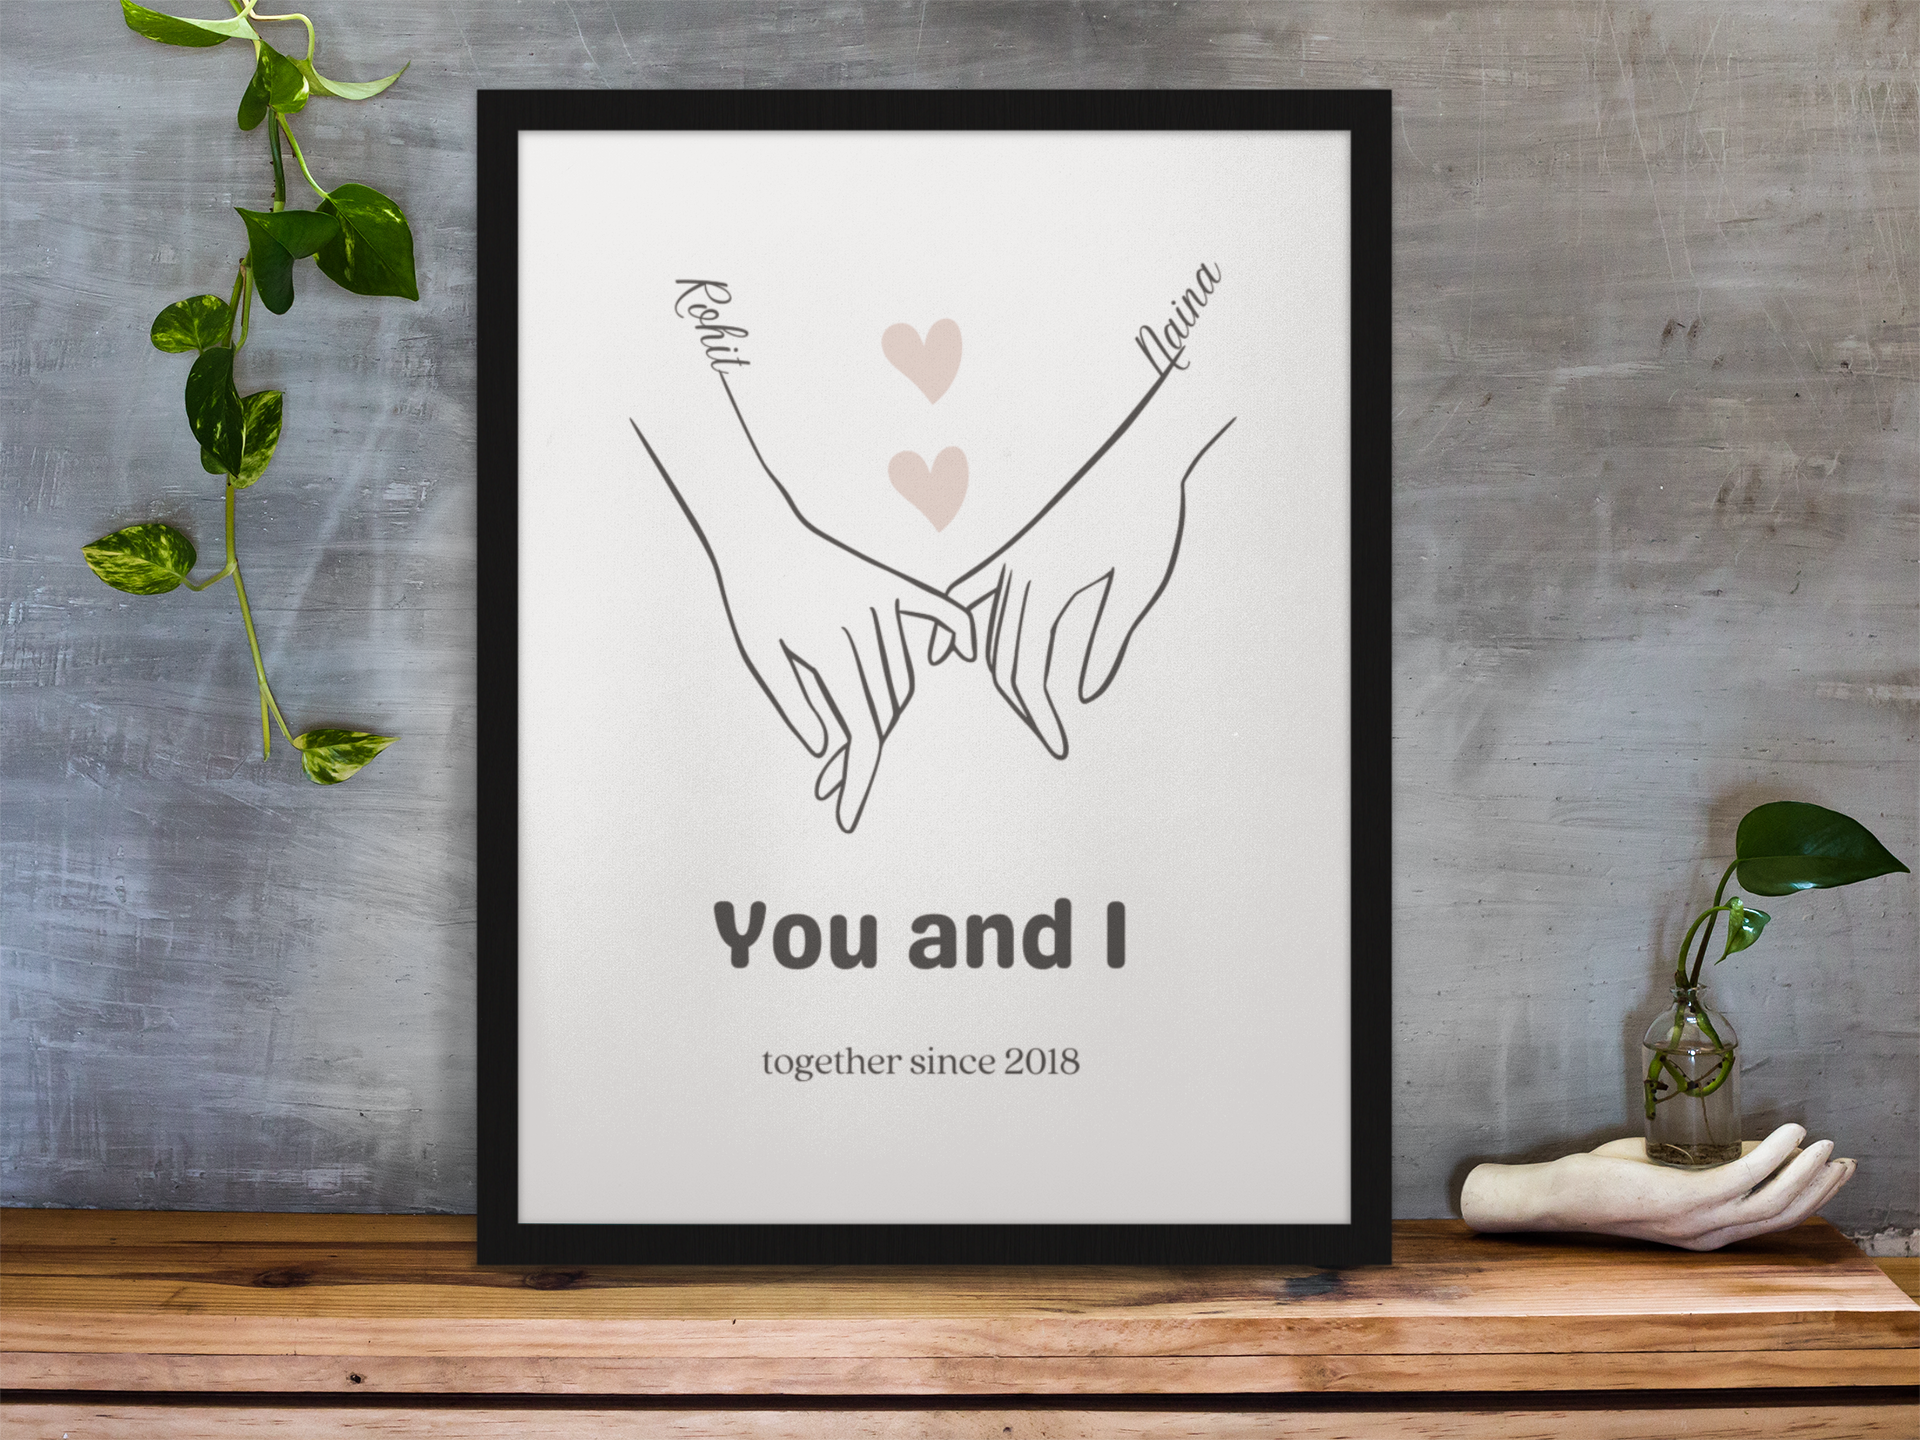 This unique and sentimental frame features an image of two people holding hands and linking pinkies